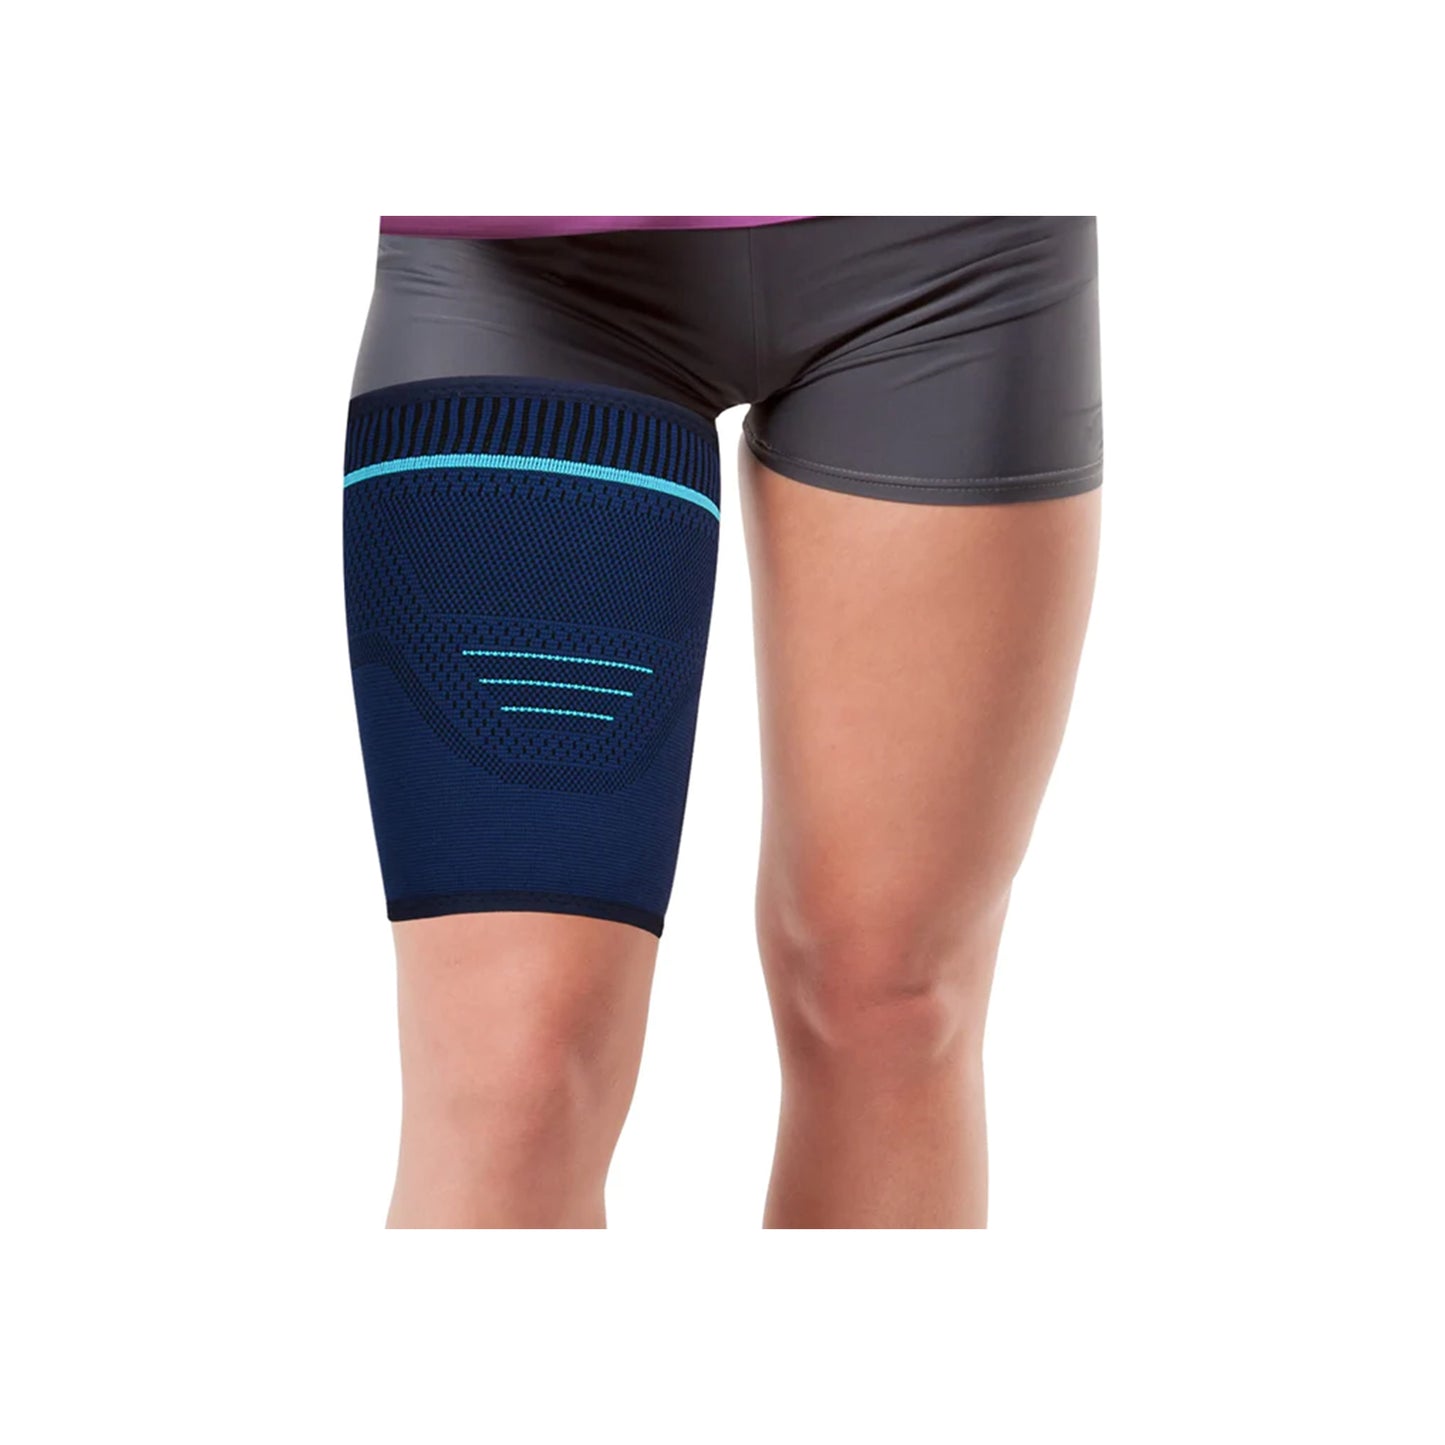 Why use a Thigh Compression Sleeve? 